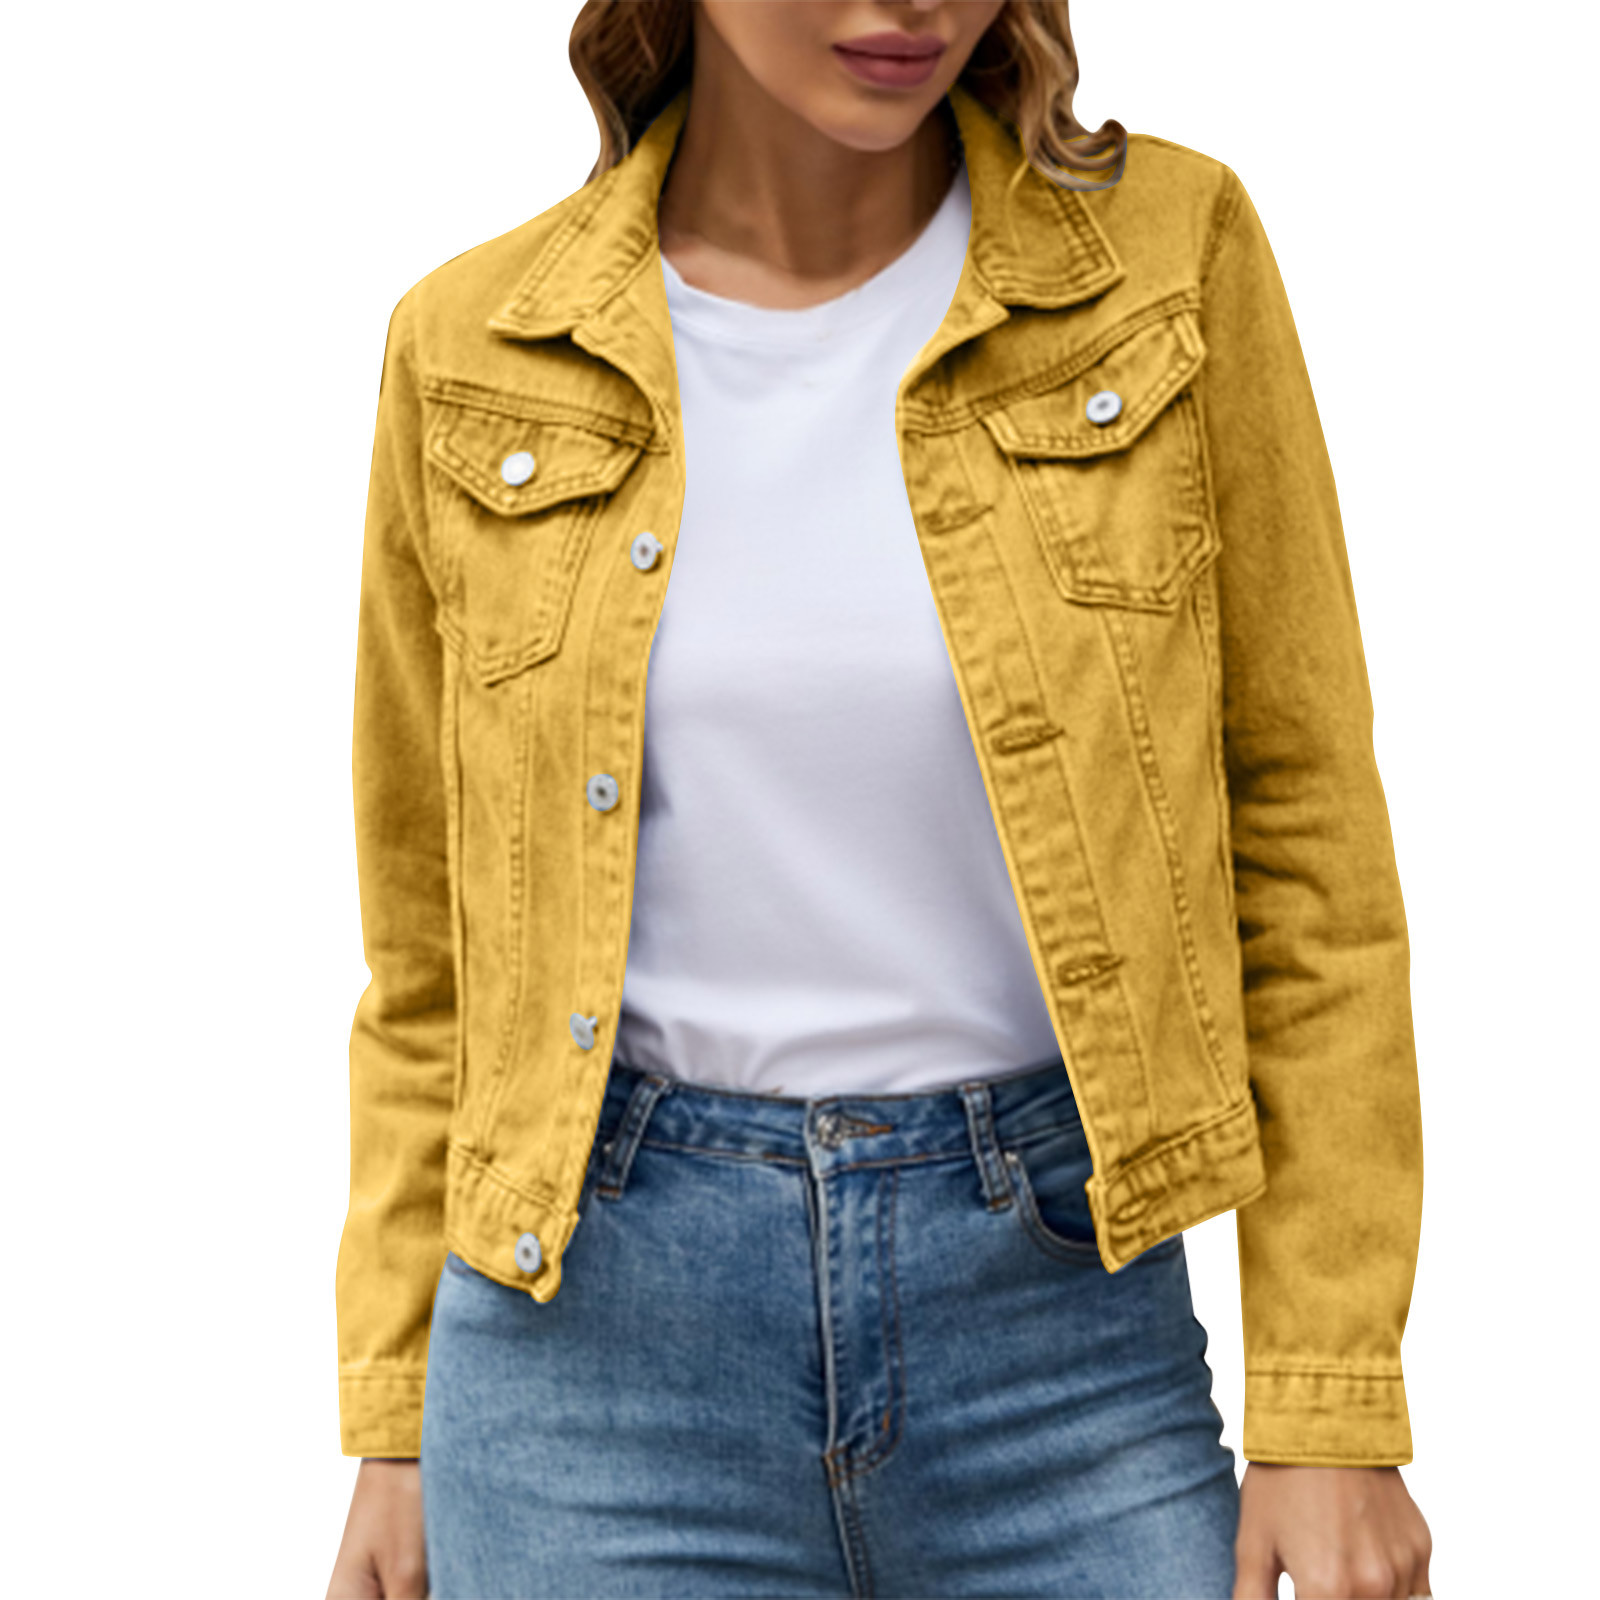 iOPQO womens sweaters Women's Basic Solid Color Button Down Denim Cotton Jacket With Pockets Denim Jacket Coat Women's Denim Jackets Yellow XXL - image 3 of 8